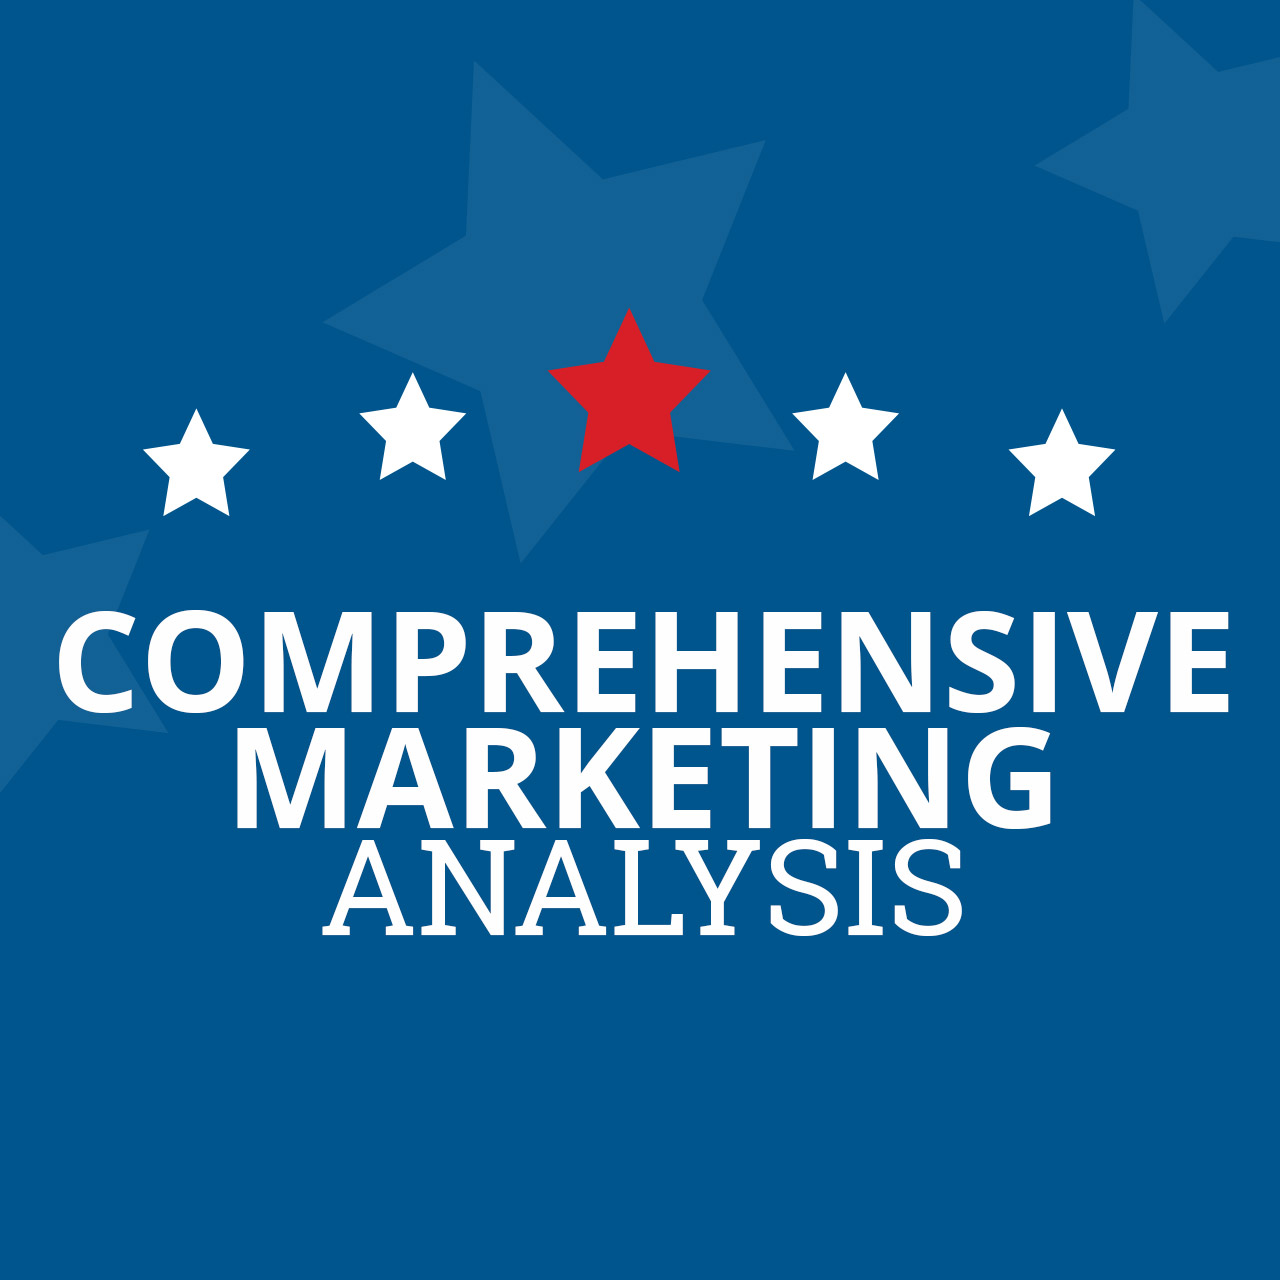 Featured image for “Comprehensive Marketing Analysis”